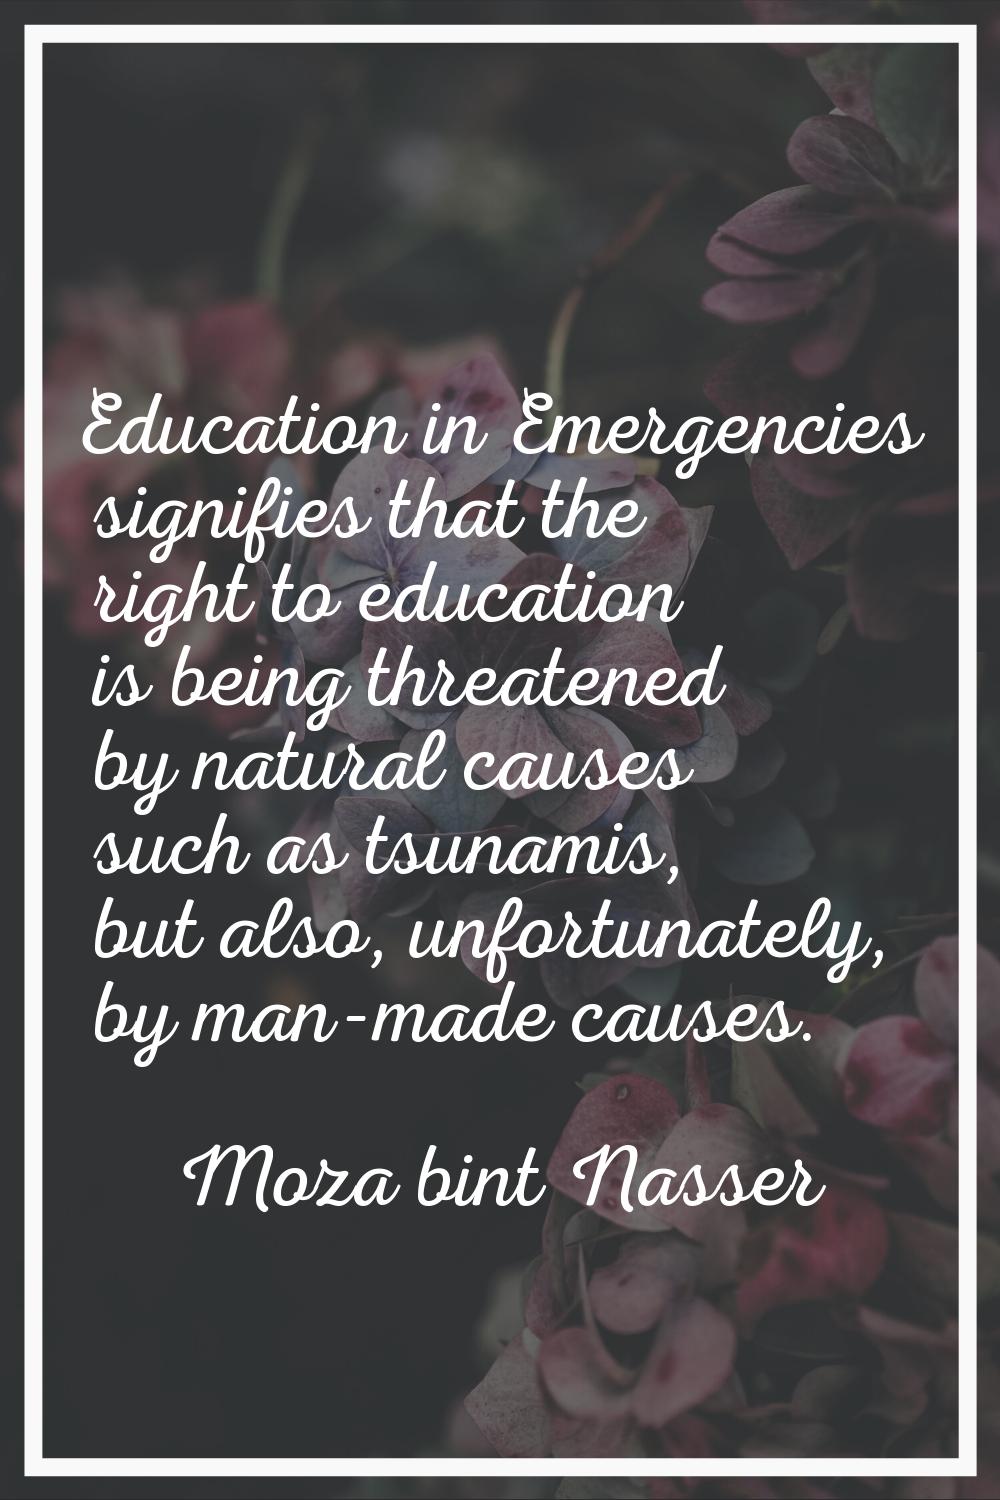 Education in Emergencies signifies that the right to education is being threatened by natural cause